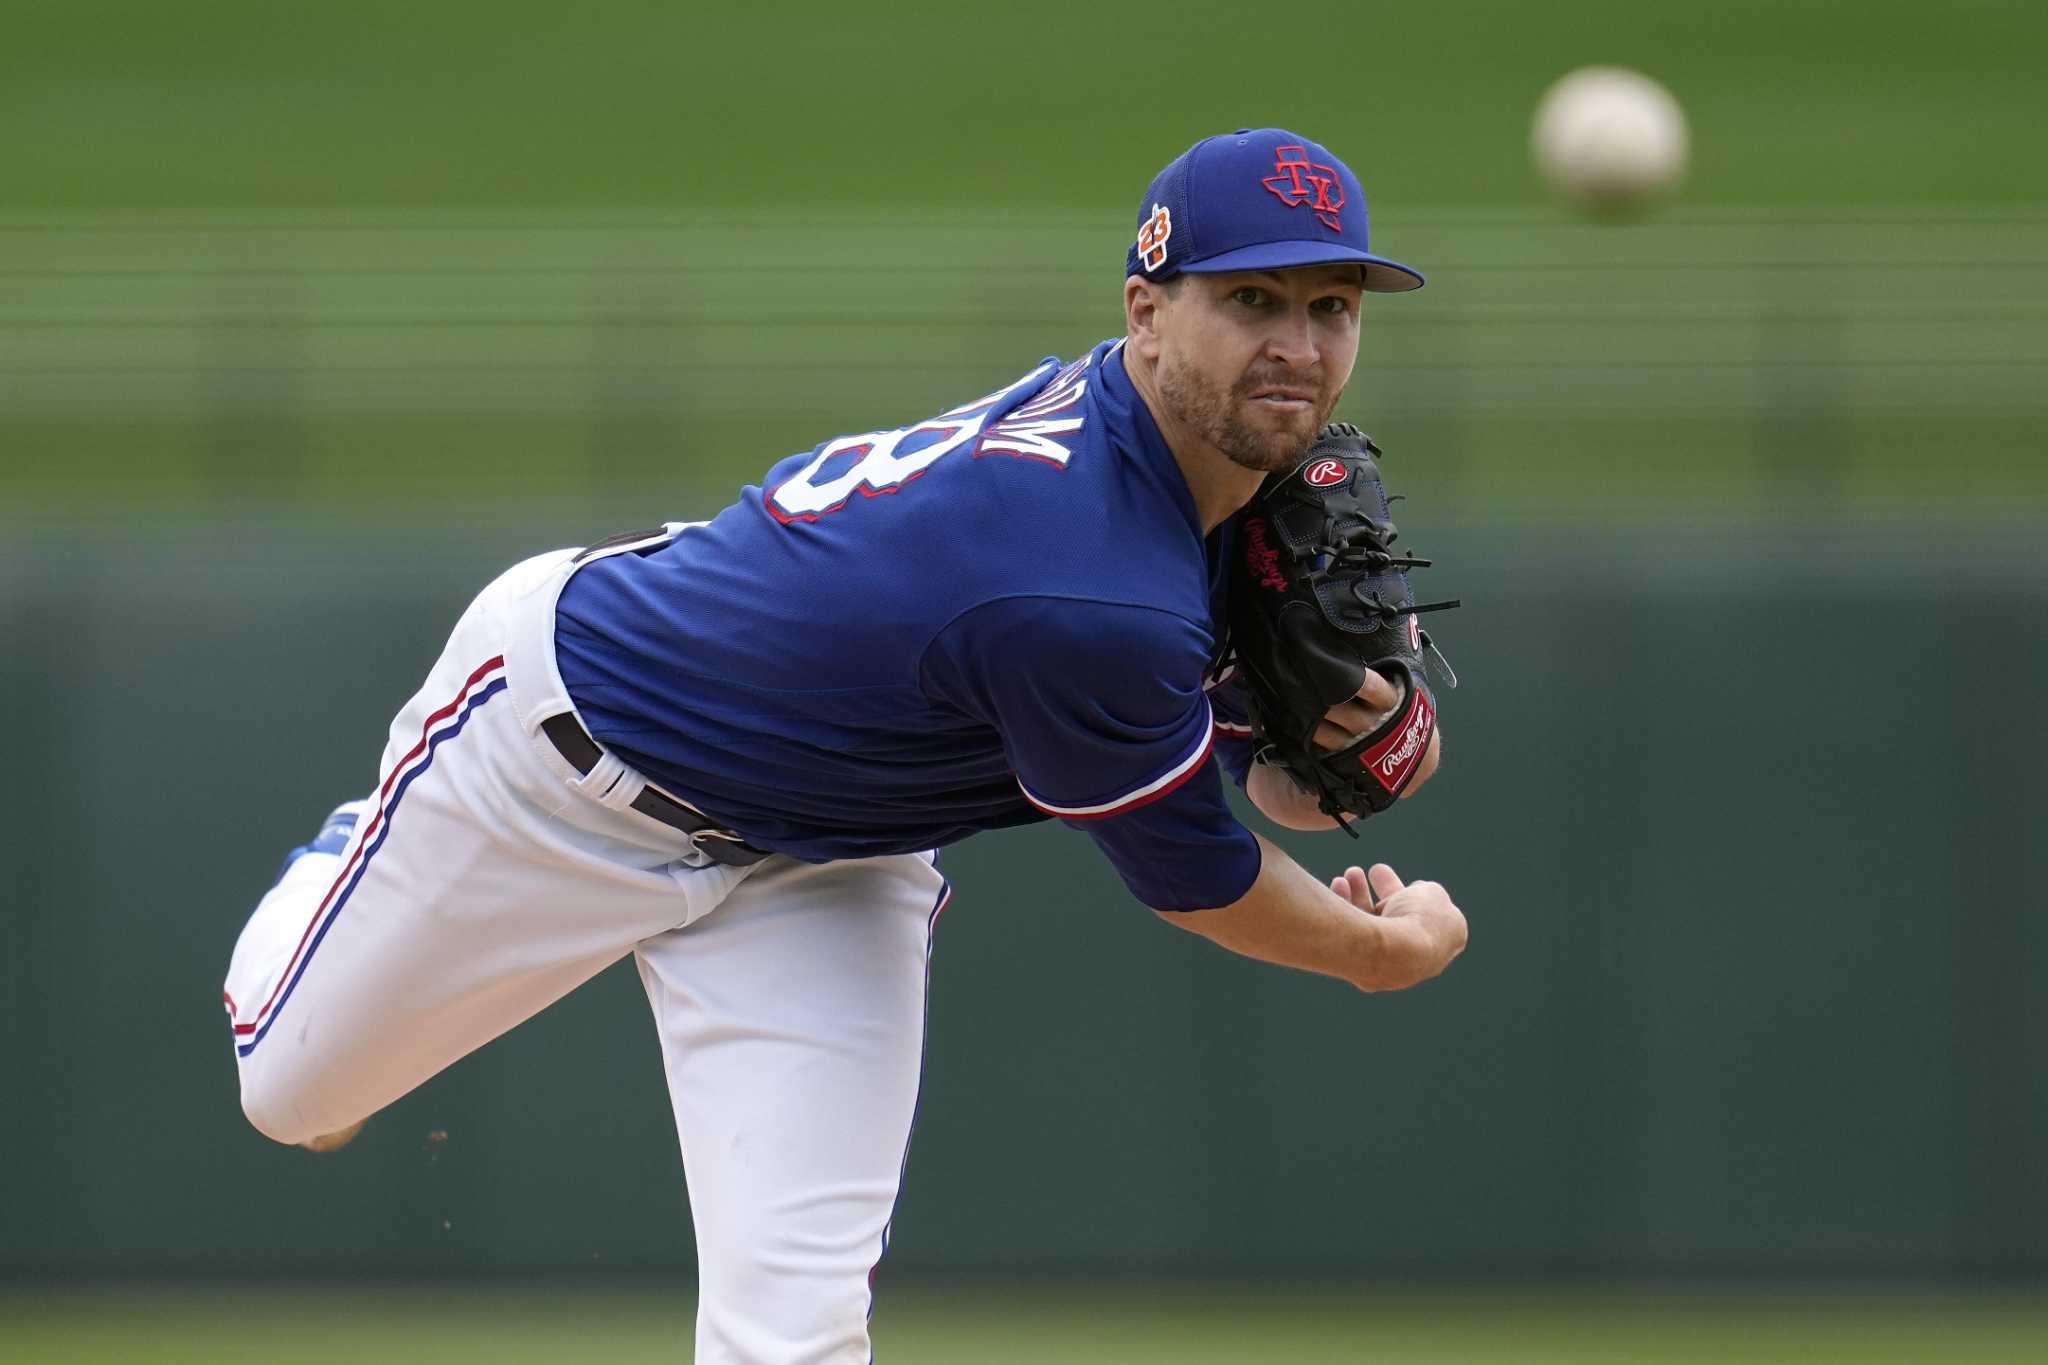 Texas Rangers ace Jacob deGrom 'frustrated' on injured list